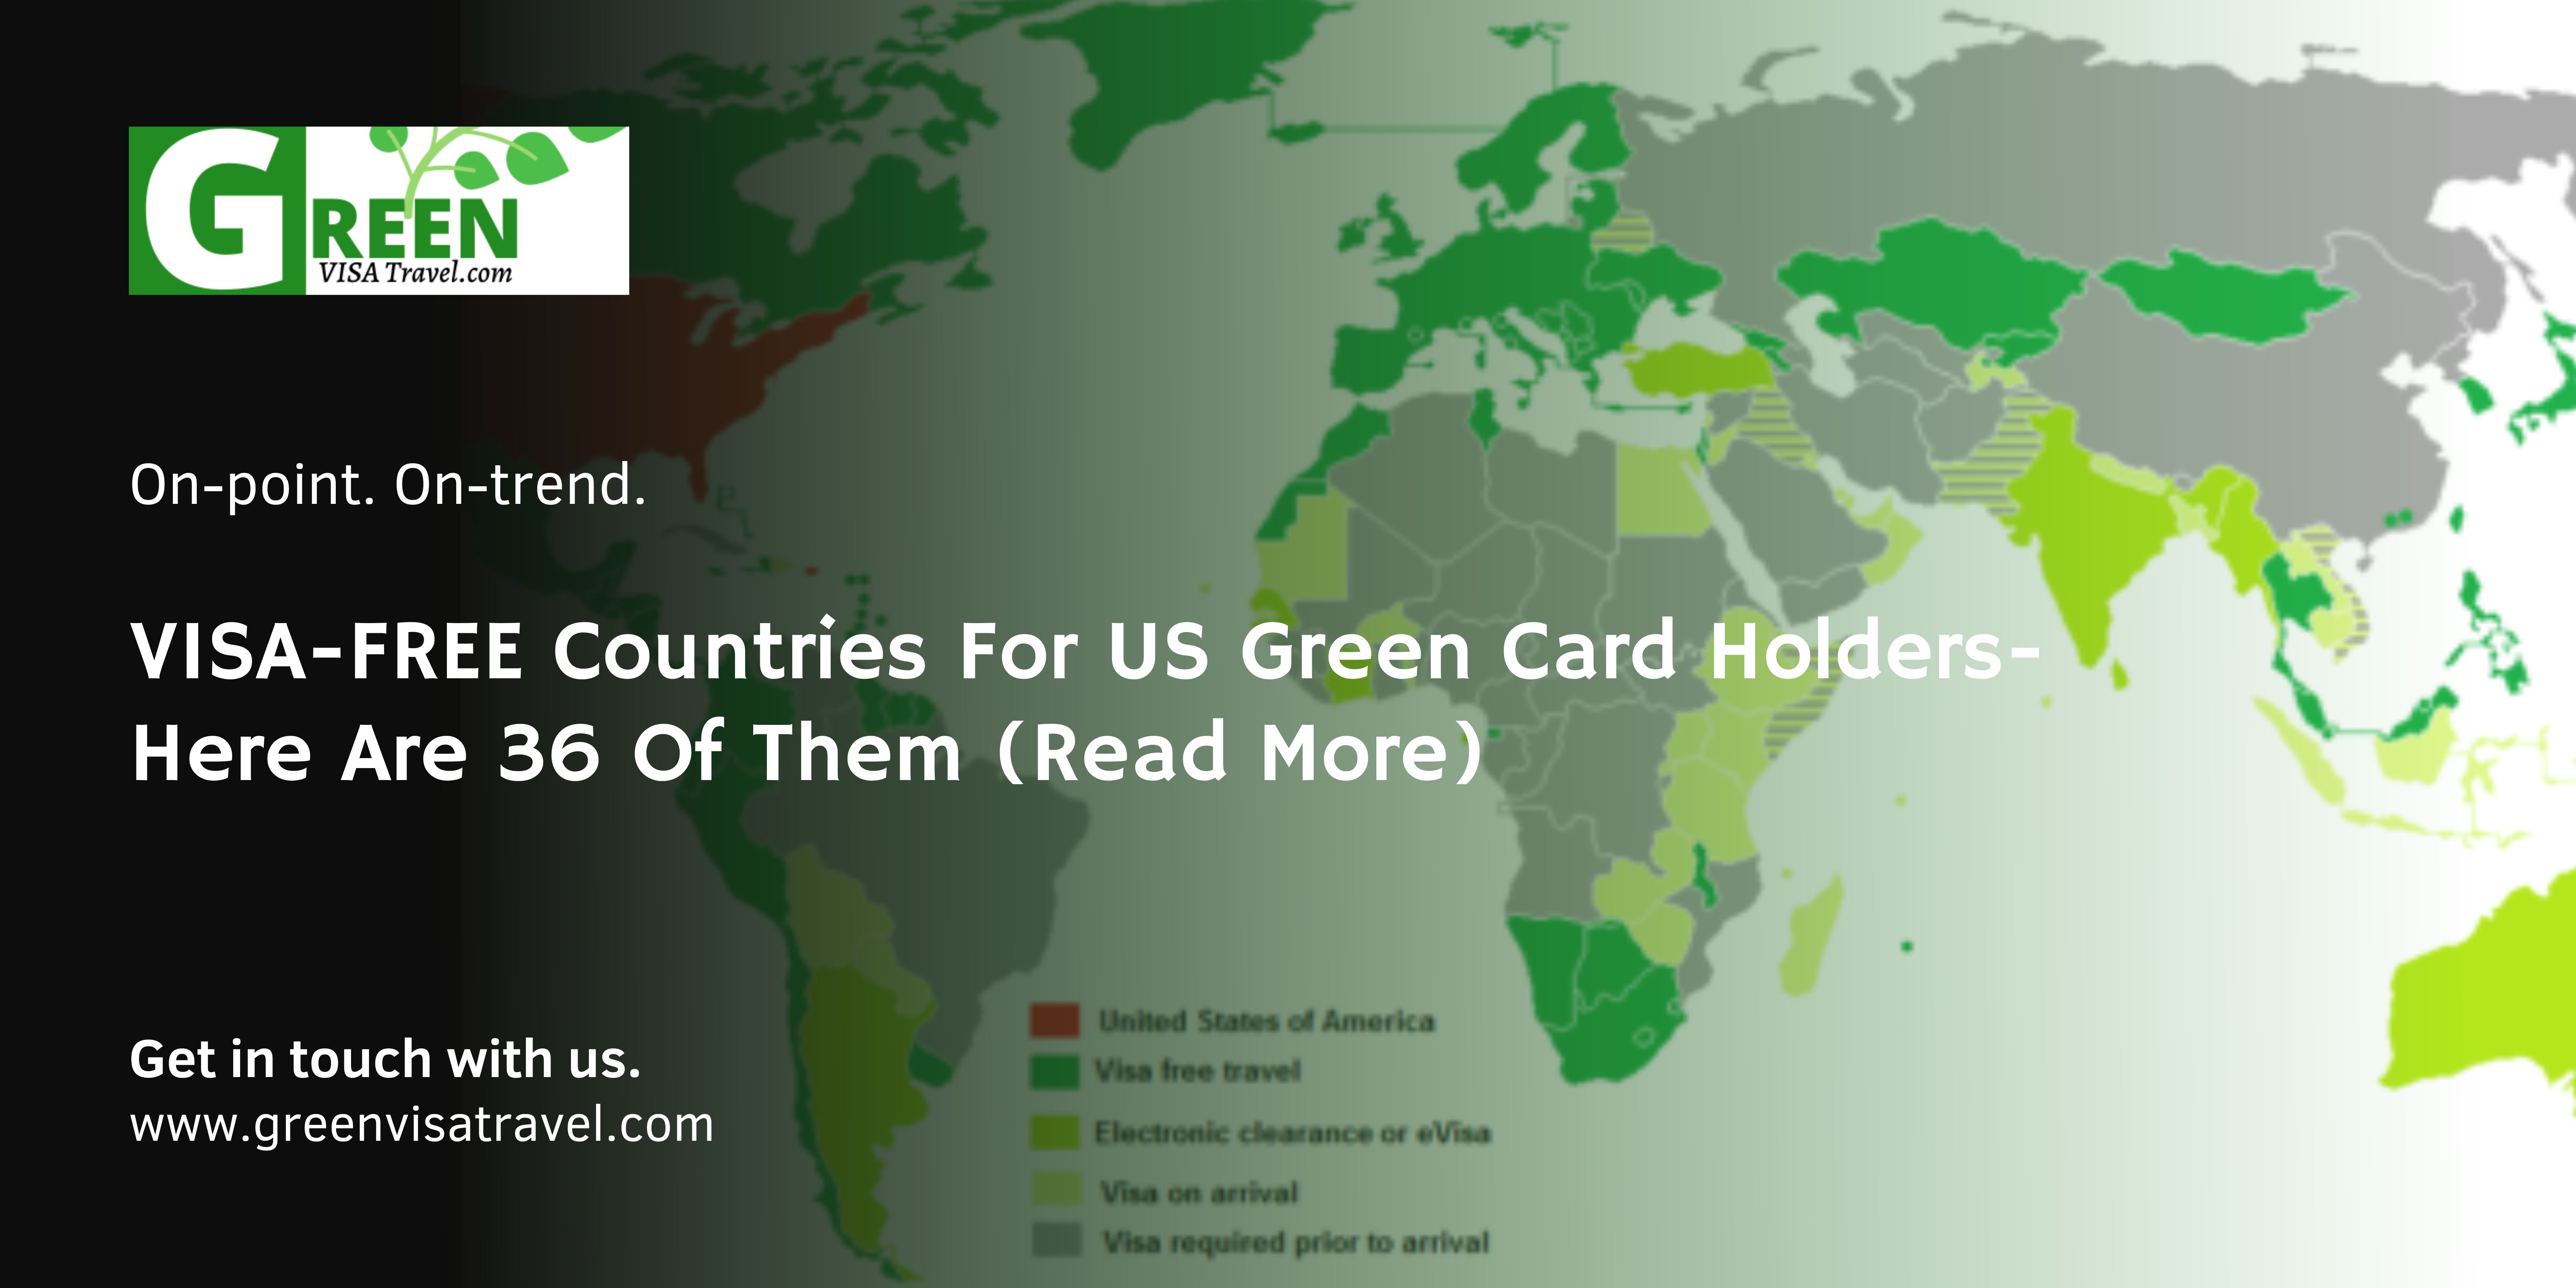 VISA-FREE Countries For US Green Card Holders- Here Are 36 Of Them (Read More)